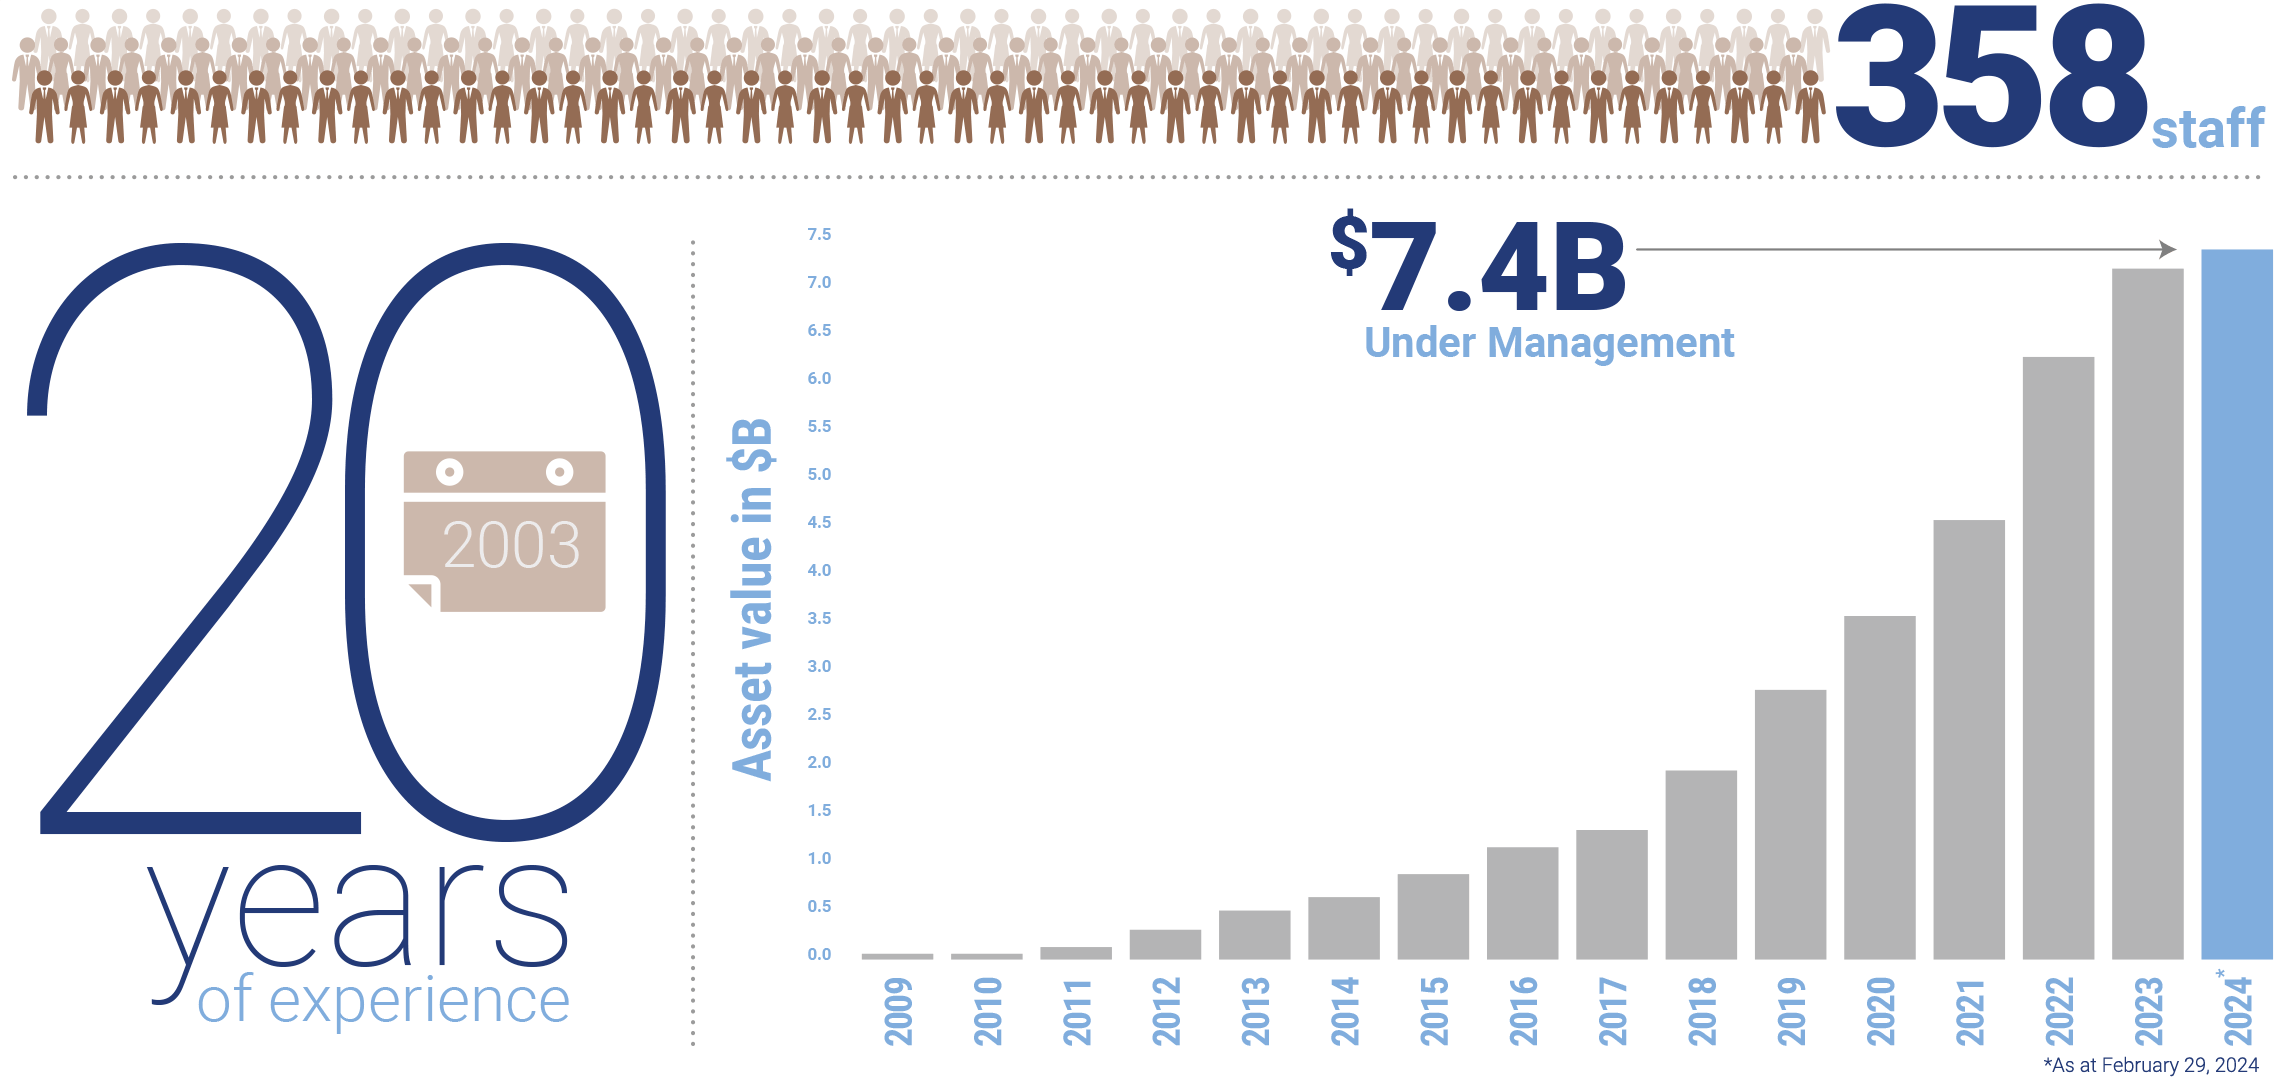 20 years of experience, 355 staff, over $7 billion under management as of August 31, 2023